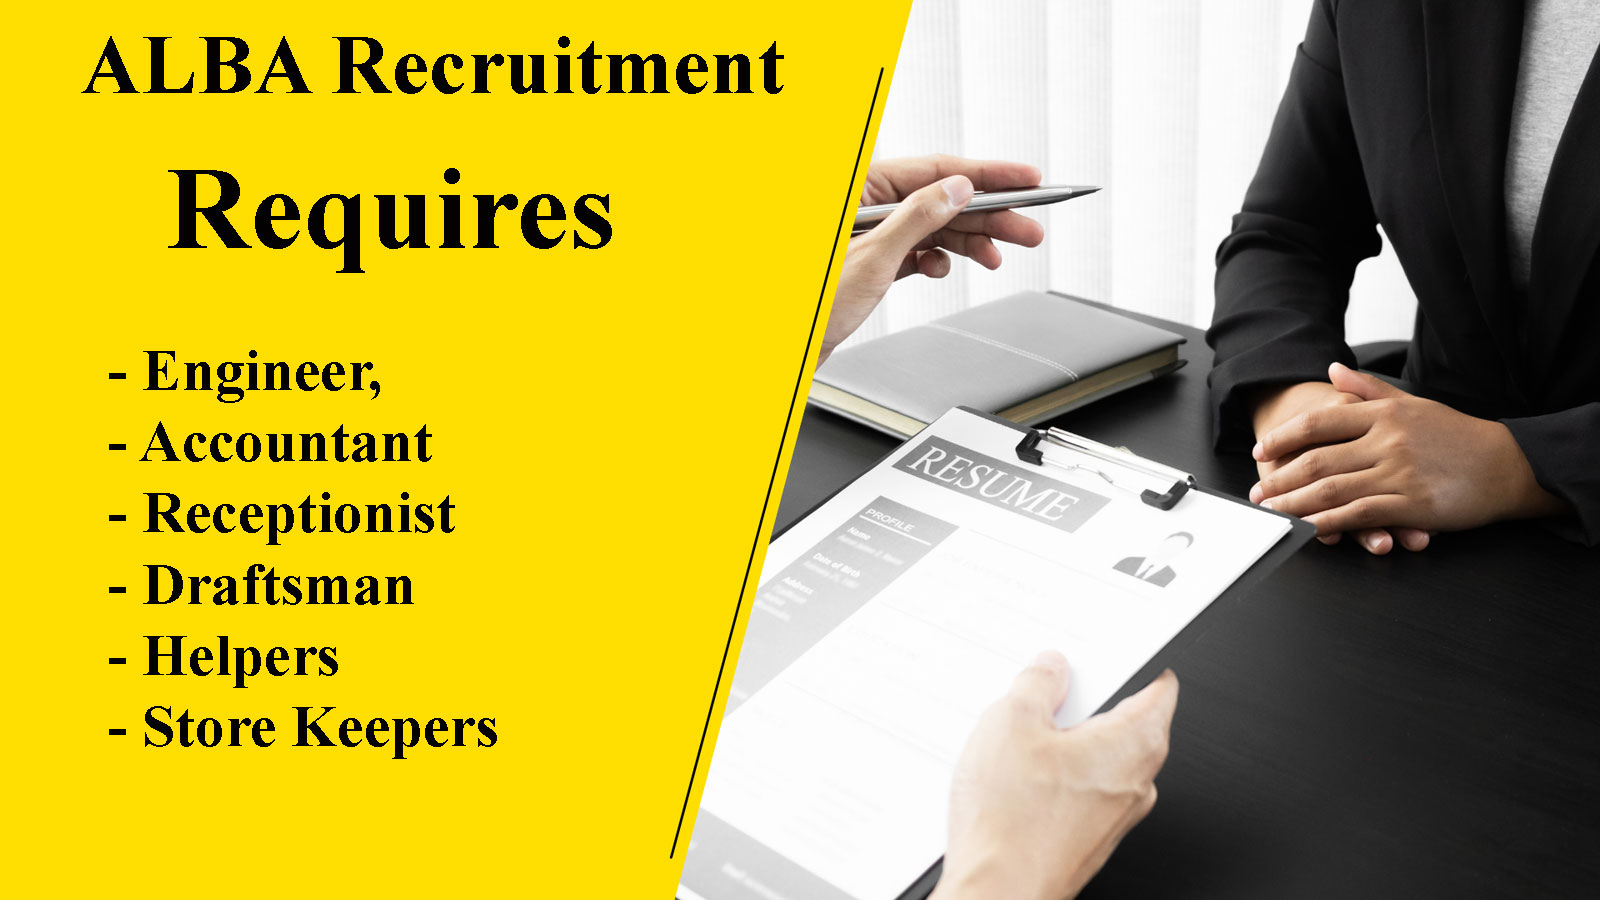 ALBA Job Recruitment: Requires Engineer, Accountant, Receptionist, Draftsman and other posts